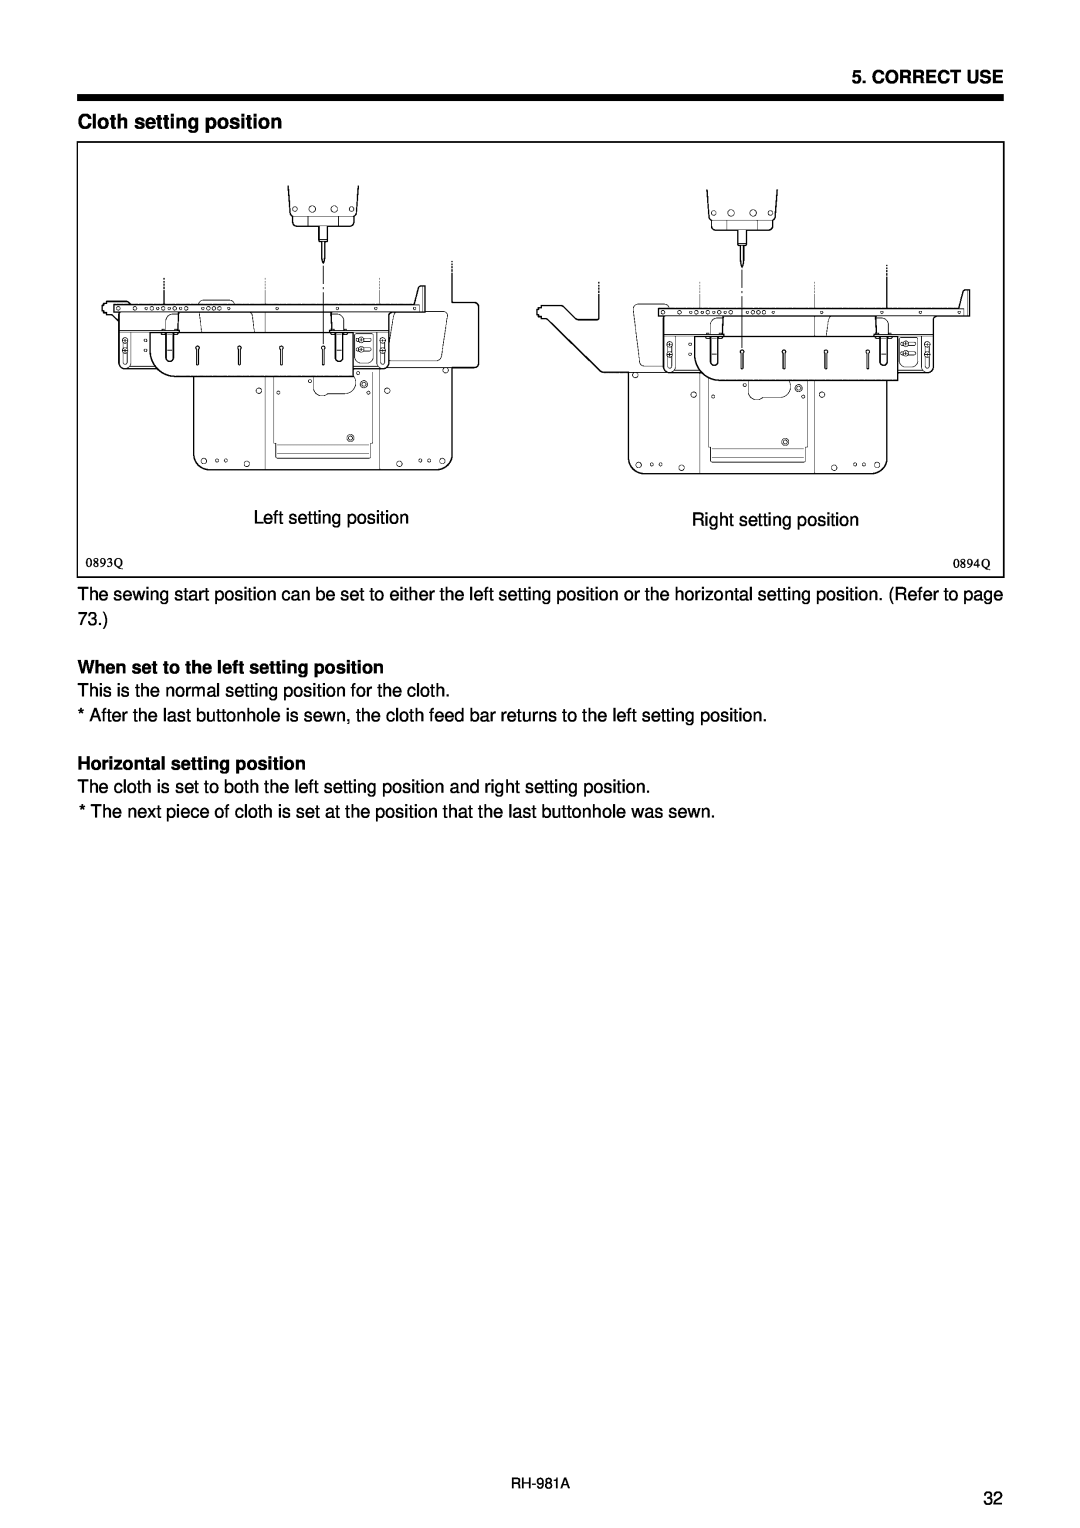 Brother rh-918a manual Cloth setting position 